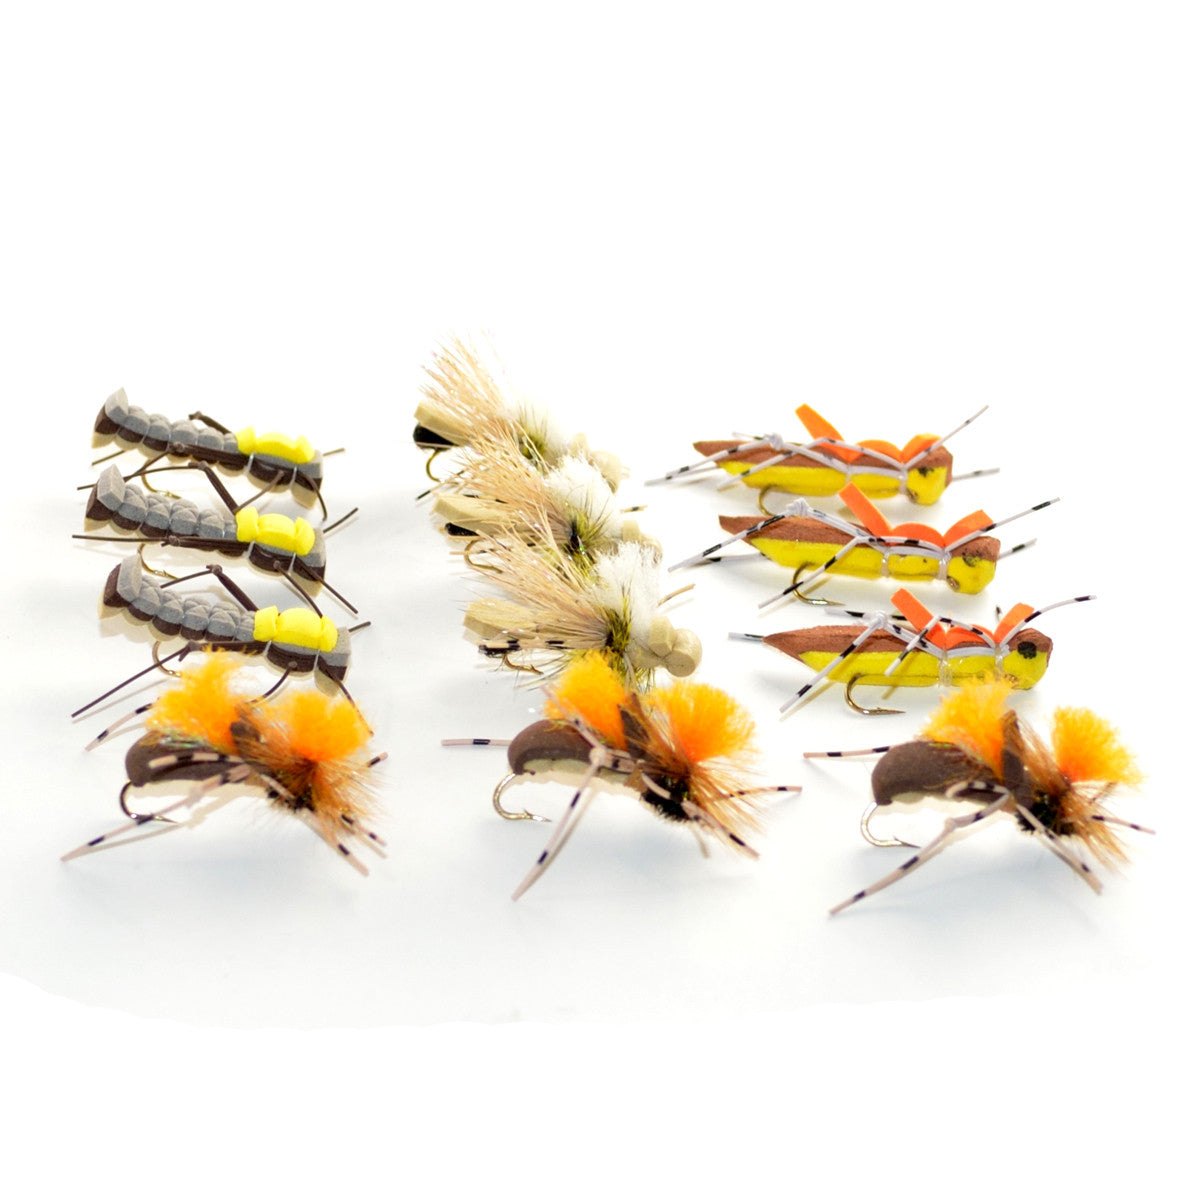 Trout Fly Assortment - High Visibility Feth Grasshopper Dry Fly Collection  1 Dozen Flies - Foam Body Hopper Trout Bass Fly Fishing Flies : :  Sports, Fitness & Outdoors